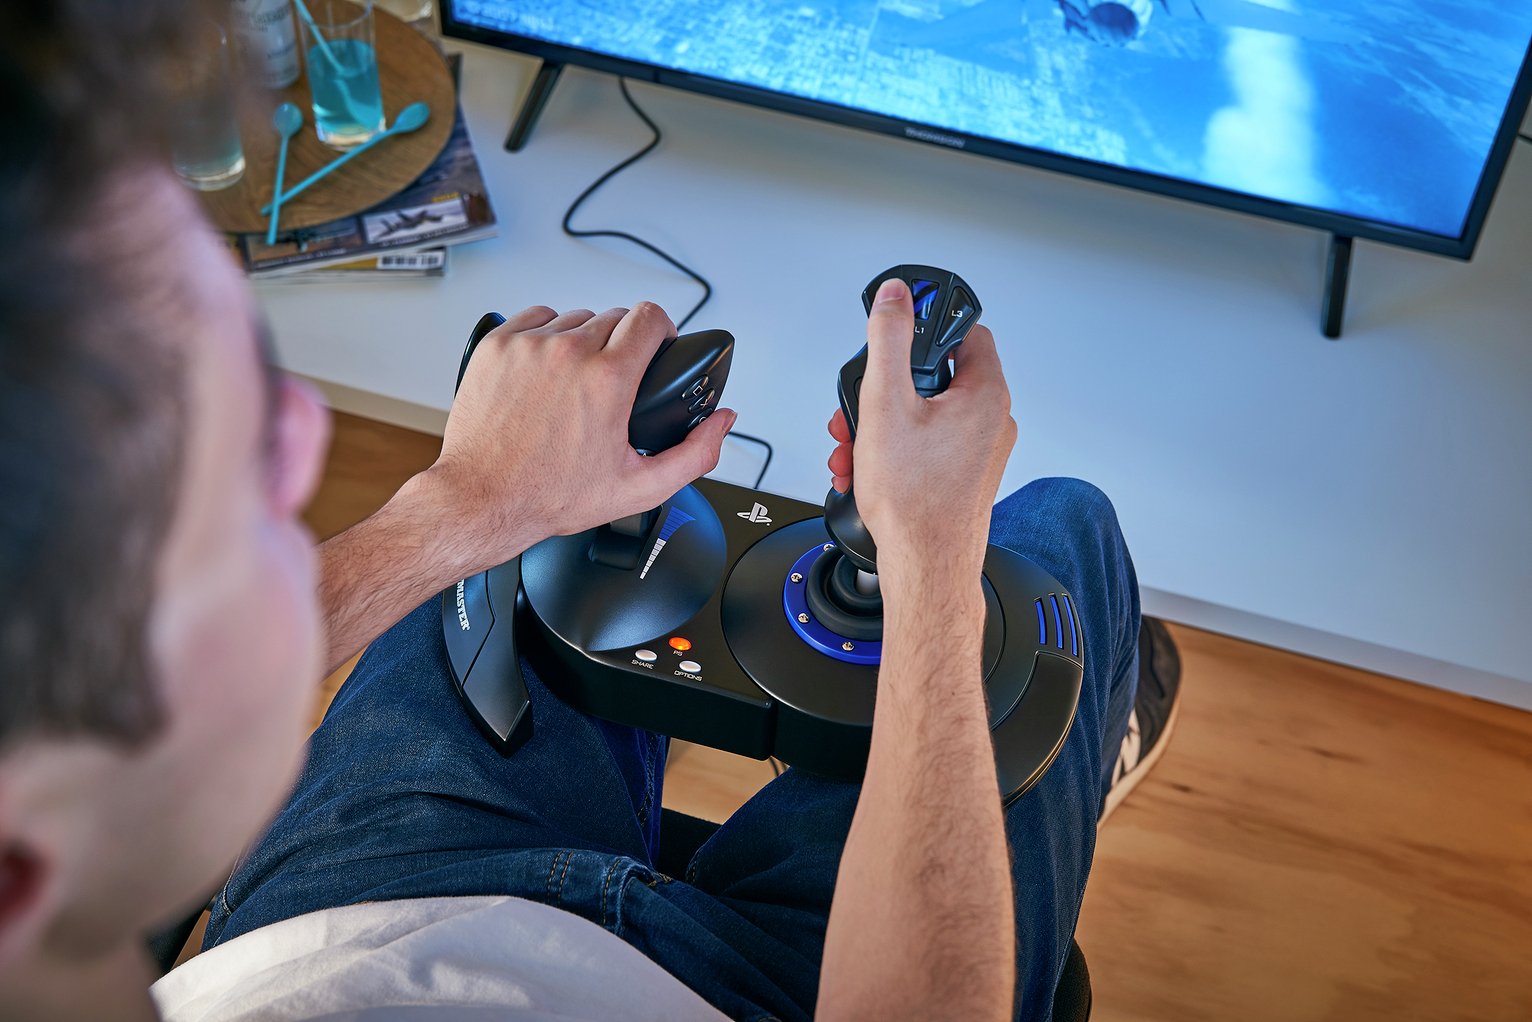 Thrustmaster T Flight Hotas 4 Joystick for PS4 & PC Review